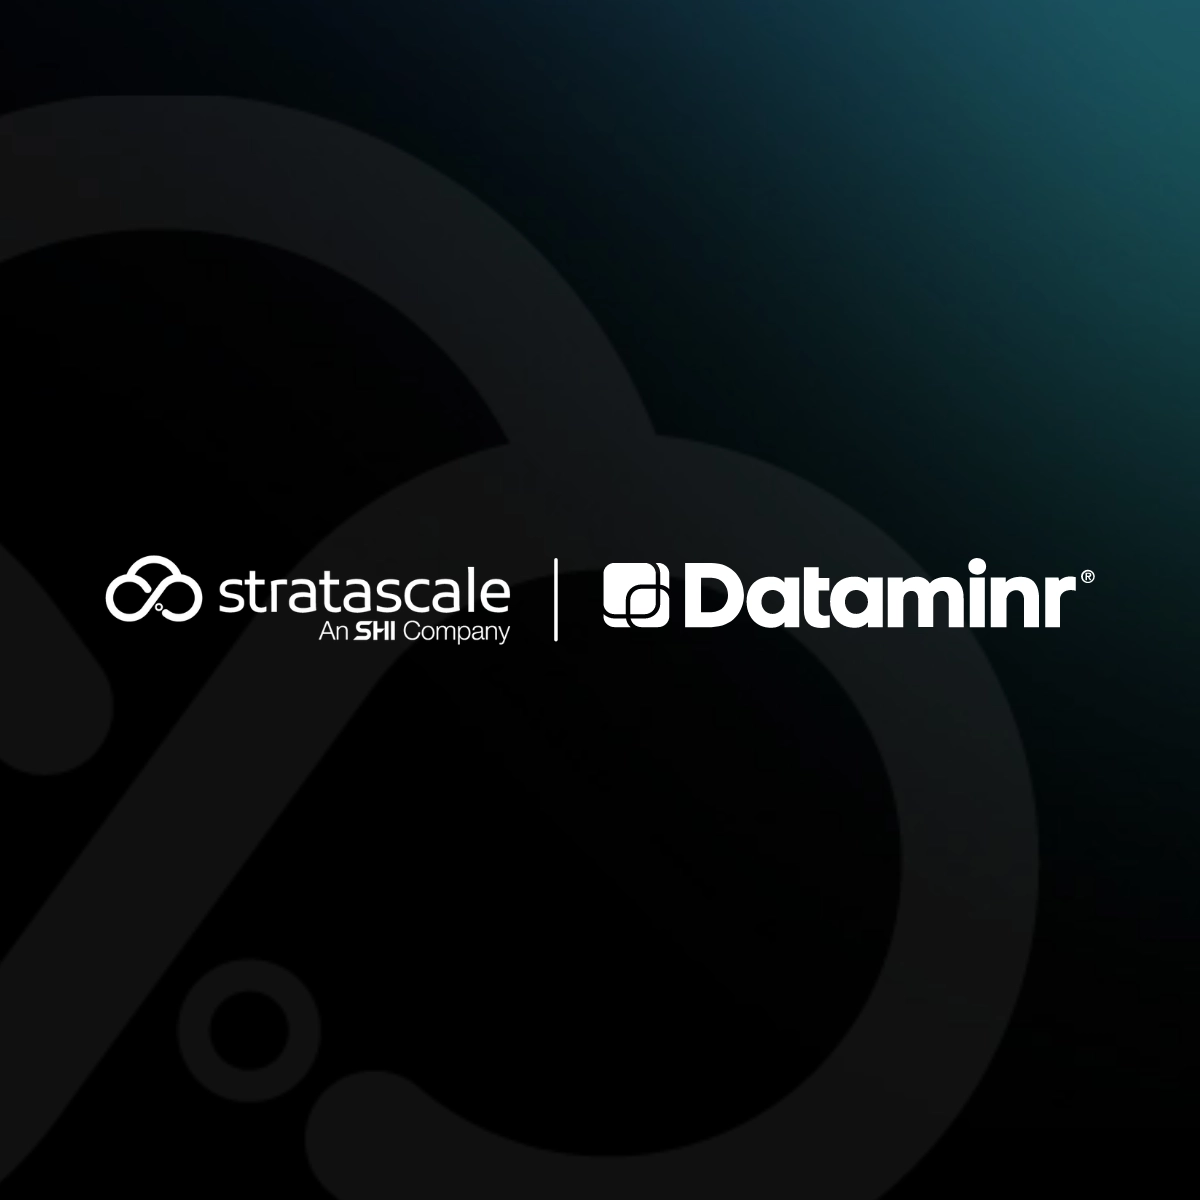 Stratascale Partners with Dataminr to Bring AI-powered Real-Time Alerting to Attack Surface Control (ASC)